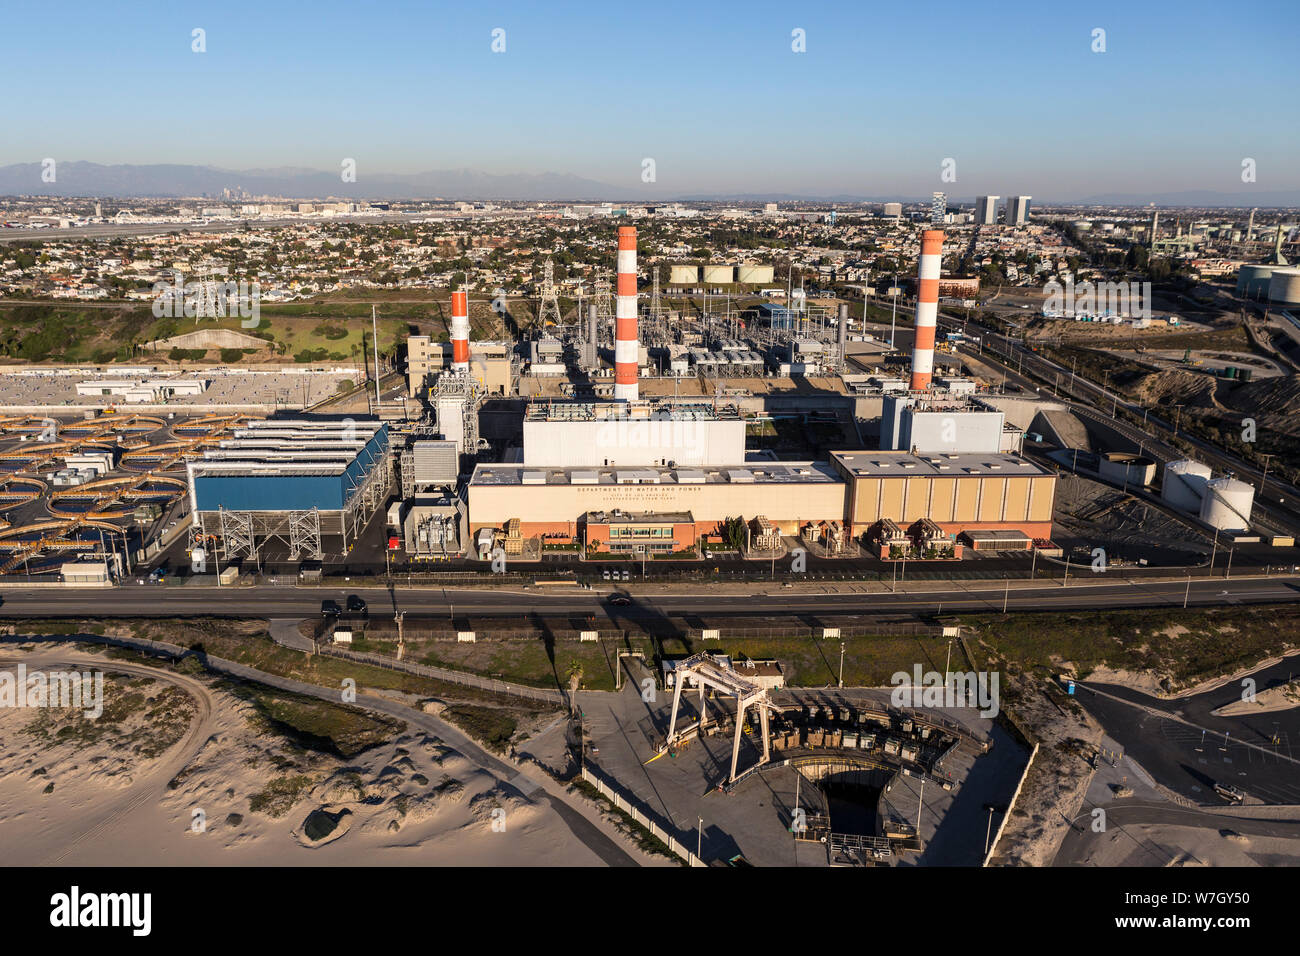 Los Angeles, California, USA - December 17, 2016:  Aerial view of Scattergood Steam Plant electric generating facility near Dockweiler state beach in Stock Photo